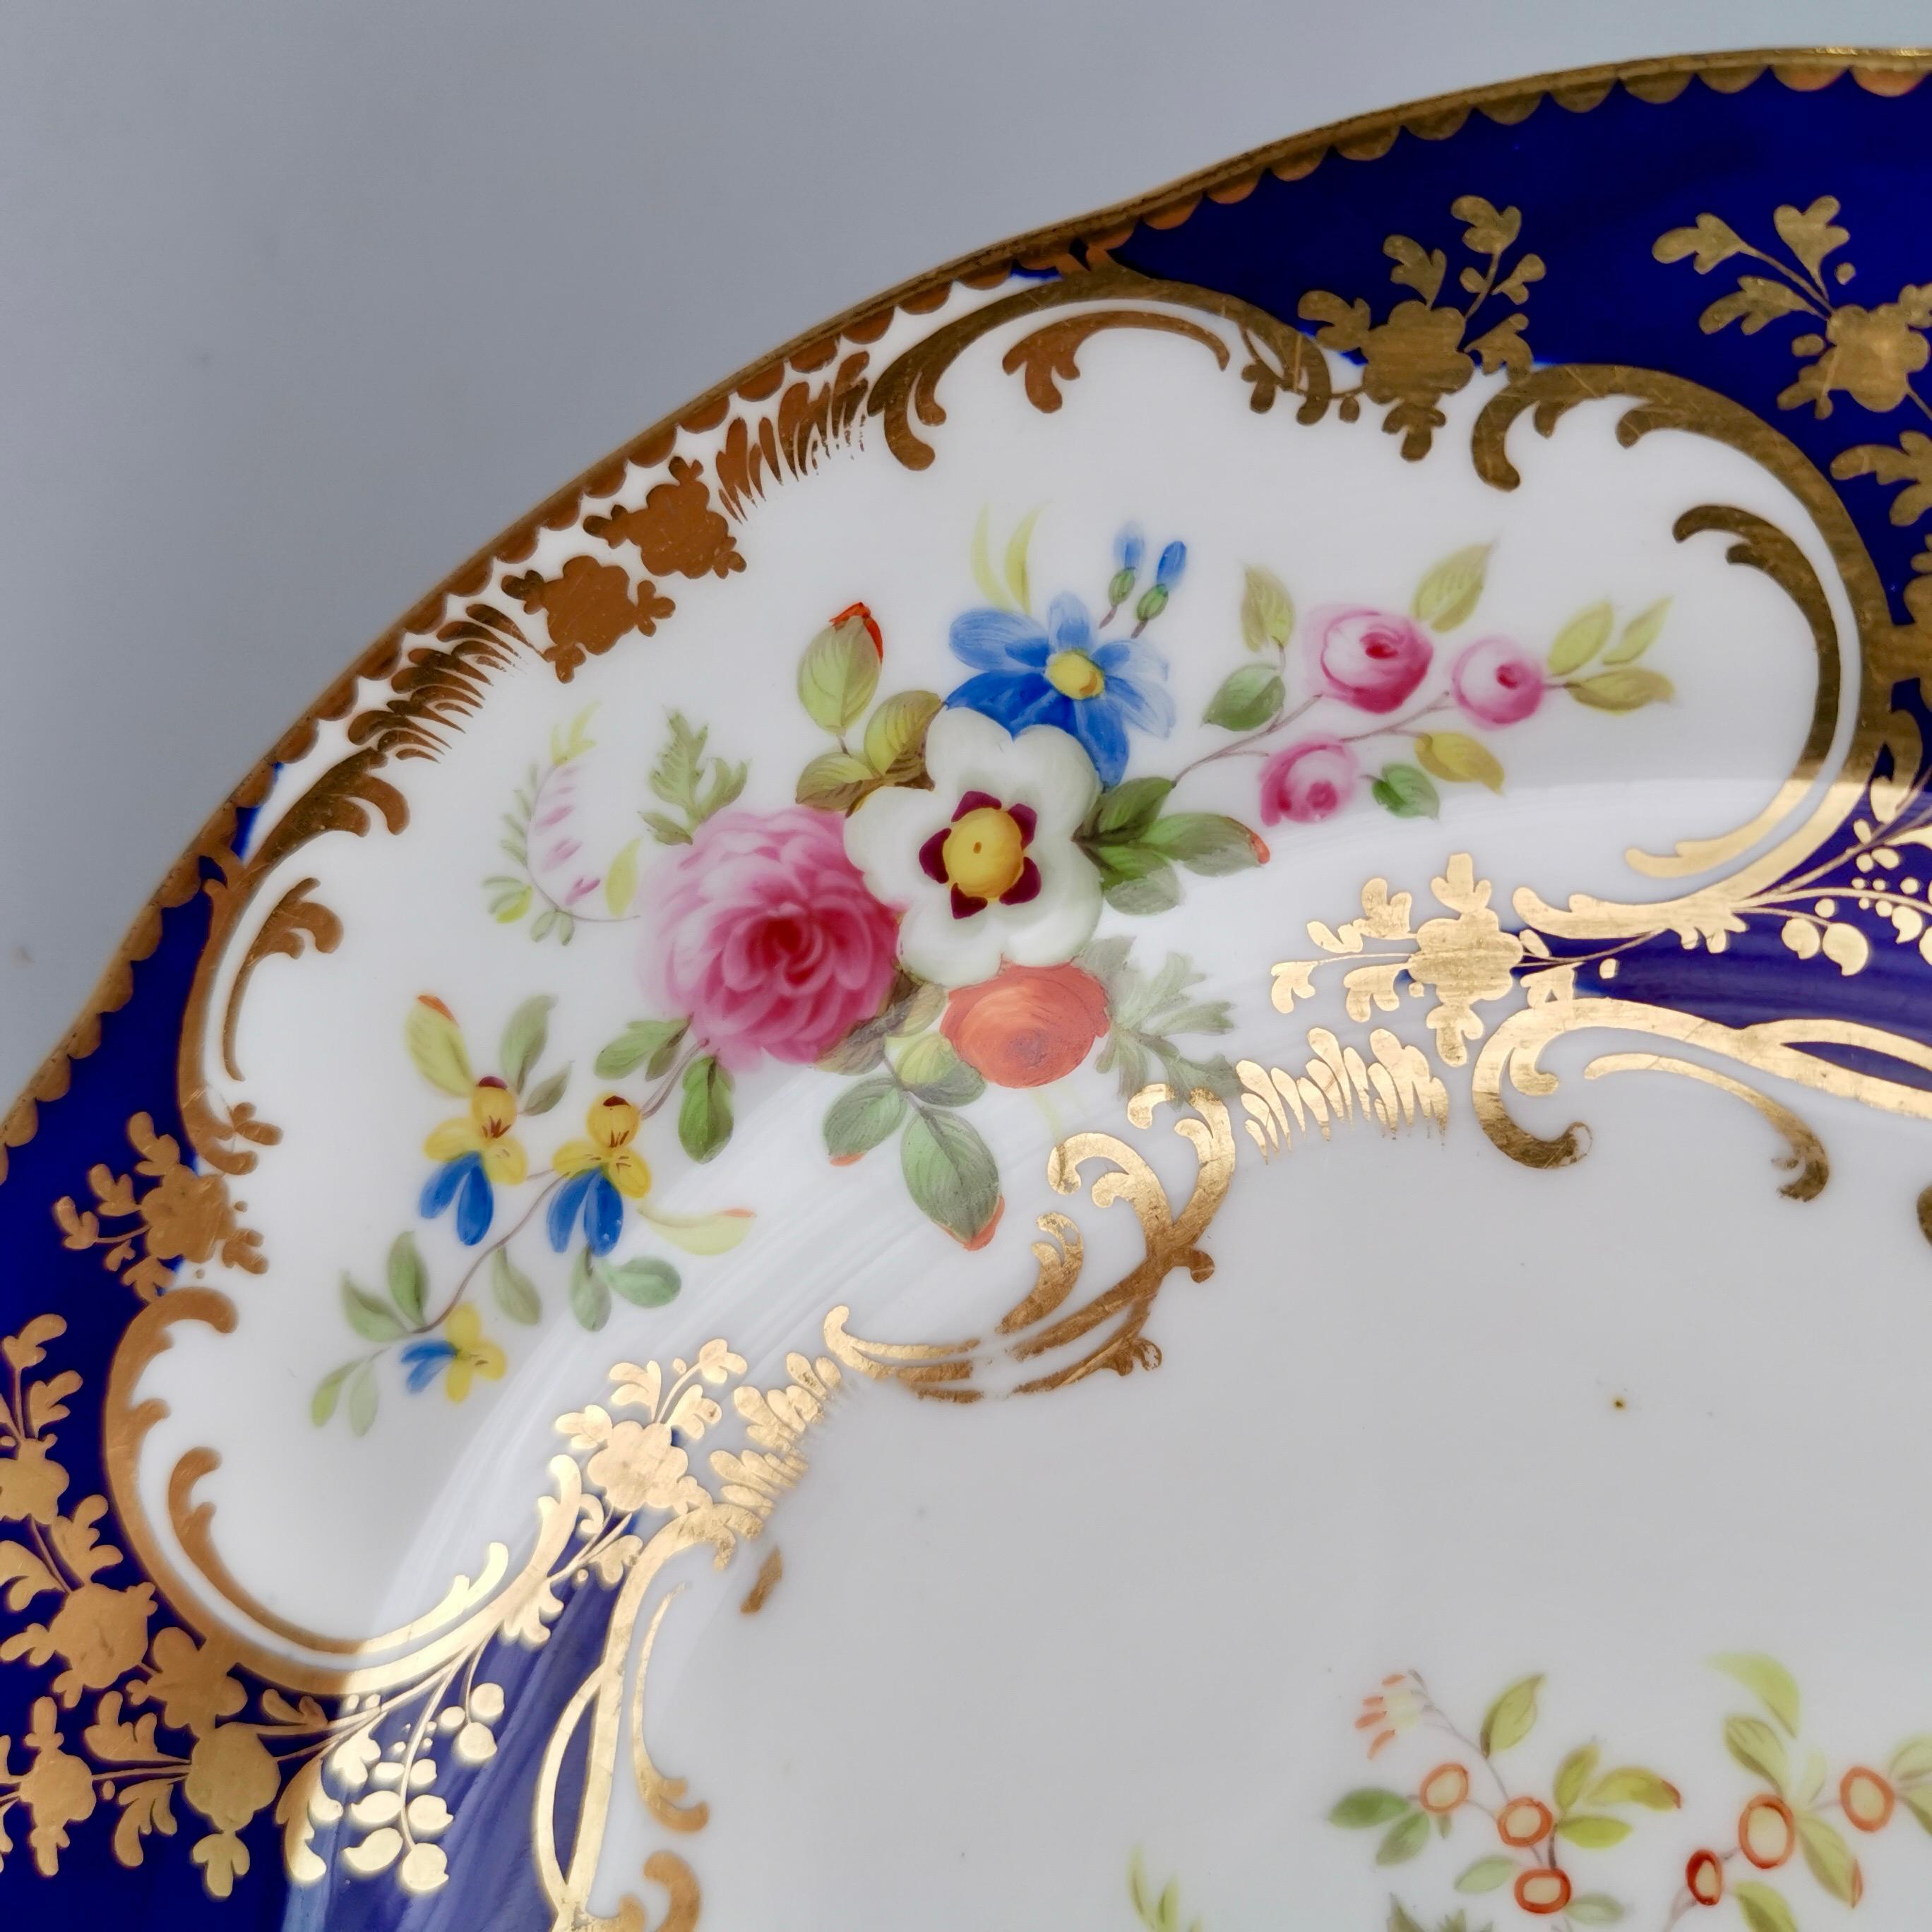 This is a beautiful dessert plate made by Minton in about 1840. The plate has a beautiful deep cobalt blue ground with three floral reserves surrounded by fine gilding, and a fourth flower arrangement in the centre. The flower painting and gilding